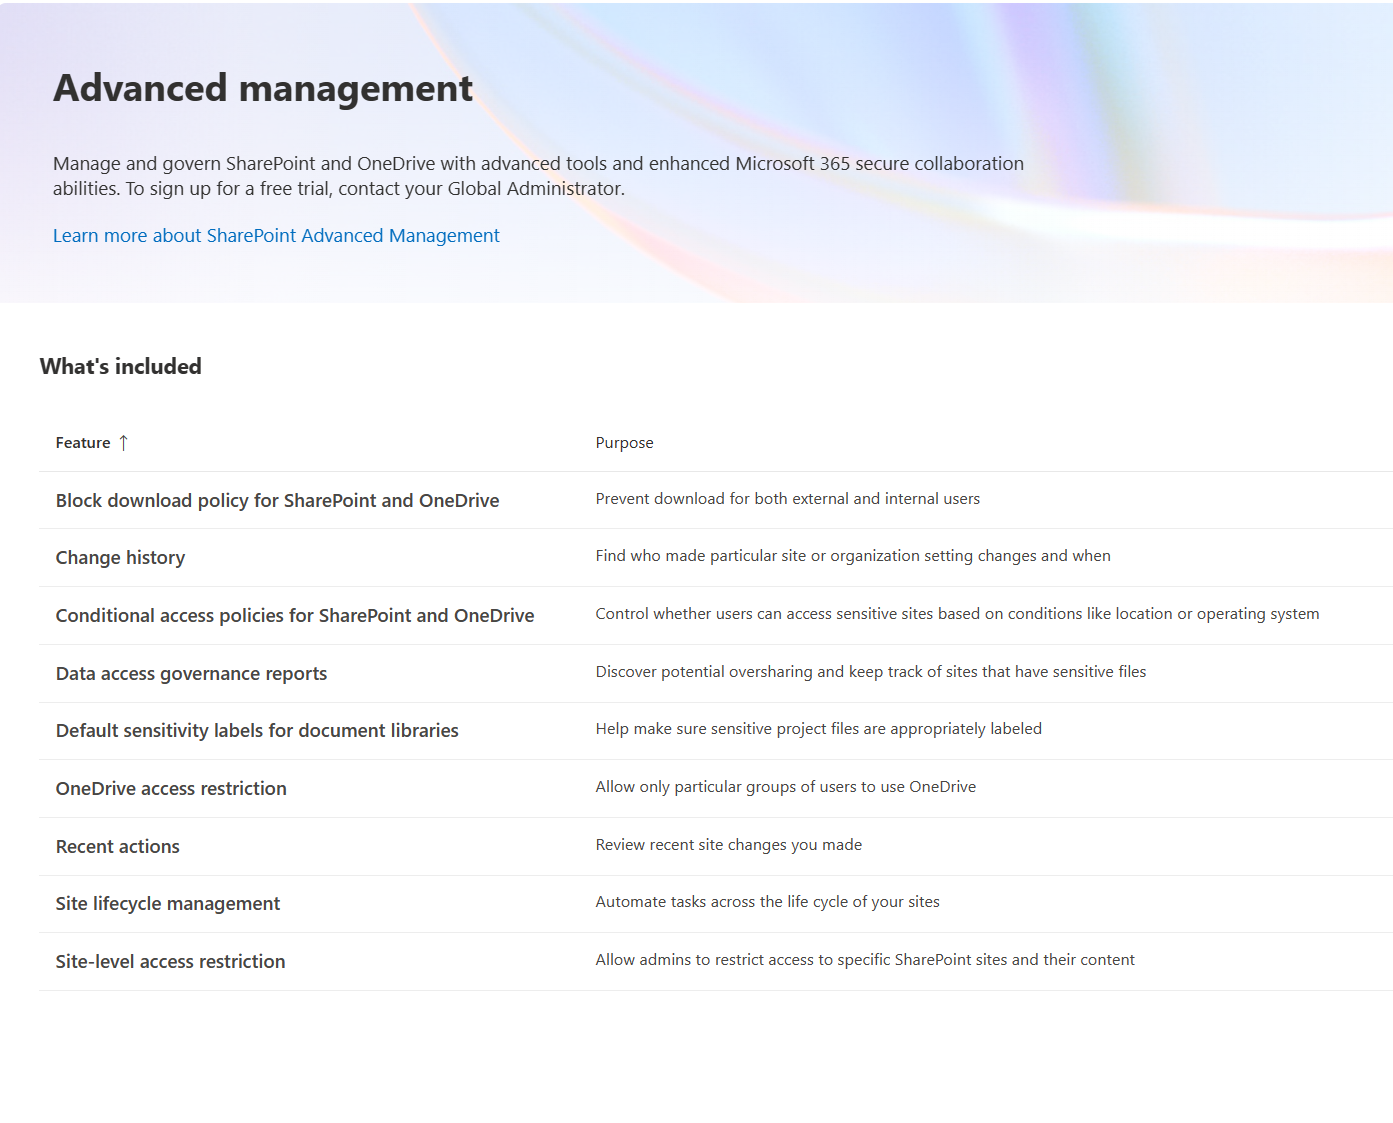 SharePoint Avanced Management features